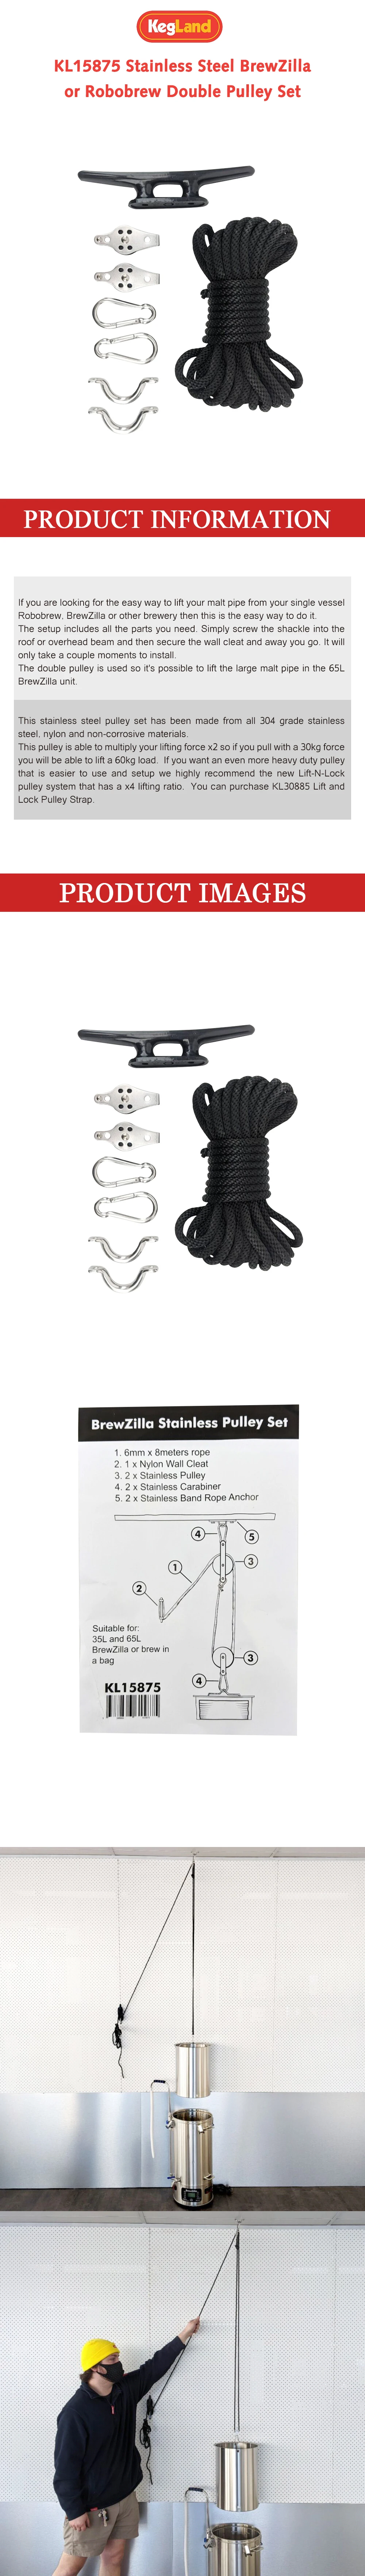 Beer Brewing Robobrew Foundry BIAB Details about   BrewZilla Stainless Double Pulley Set 